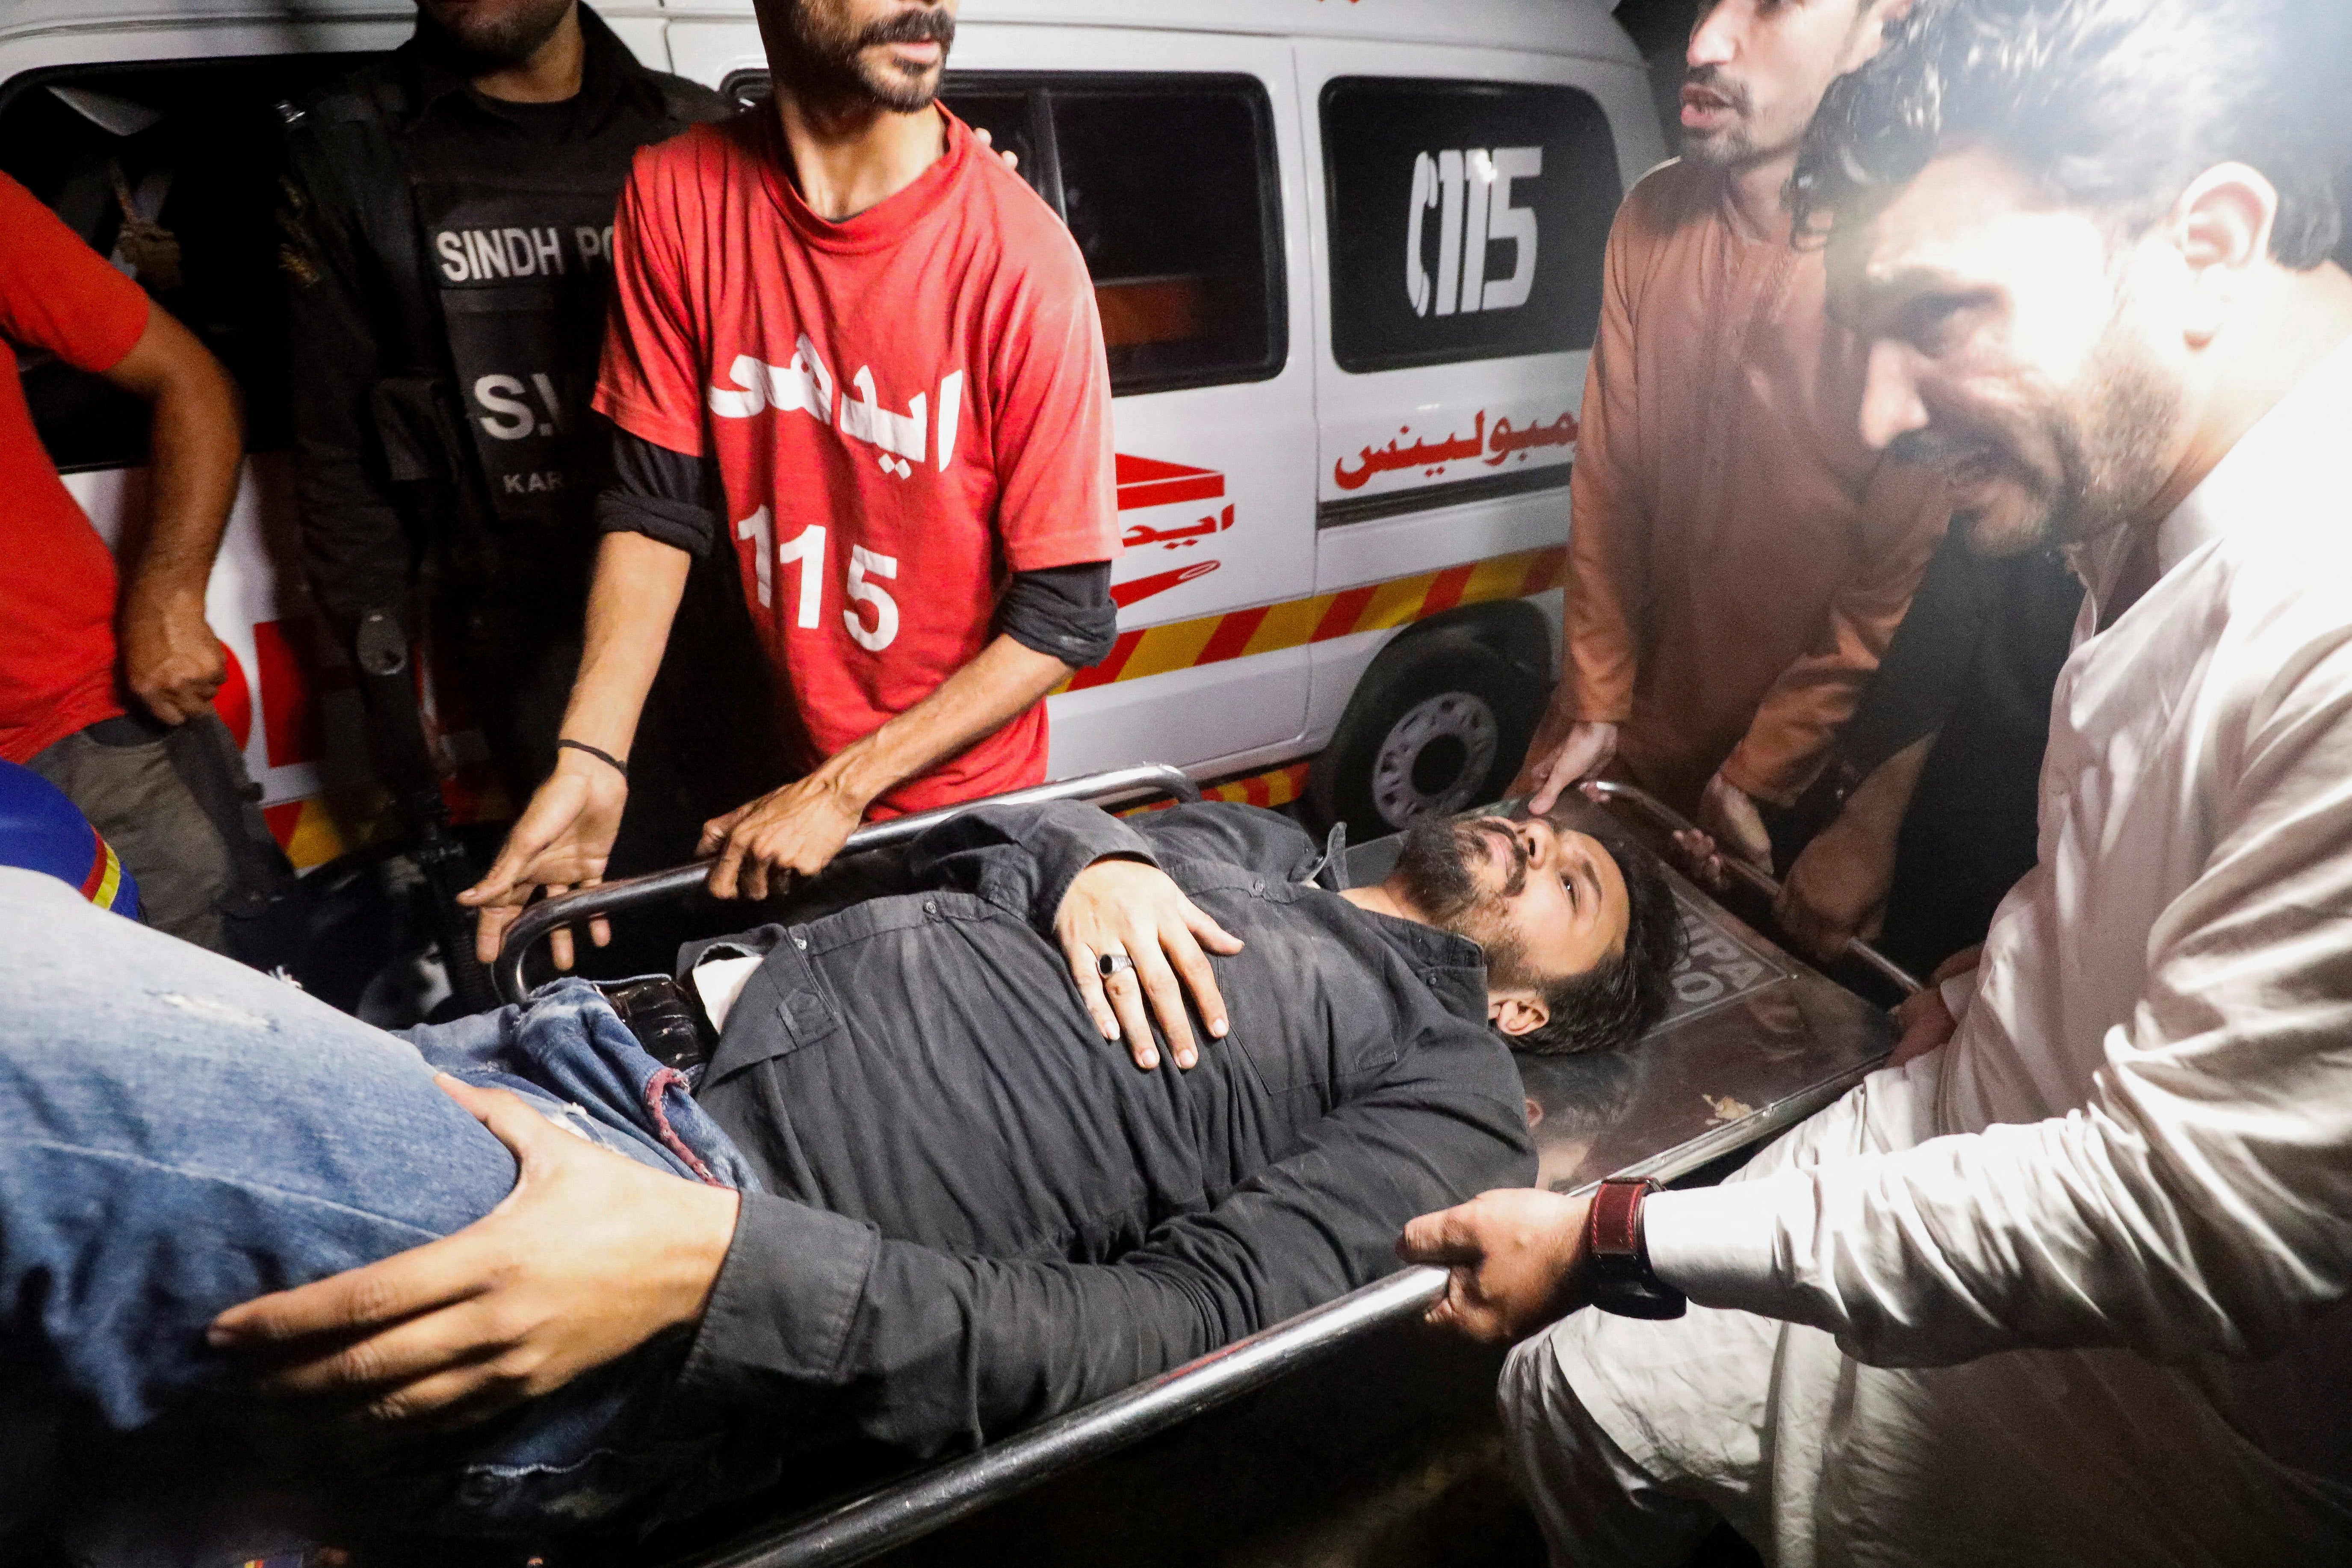 Rescue workers carry an injured person after the attack in Karachi